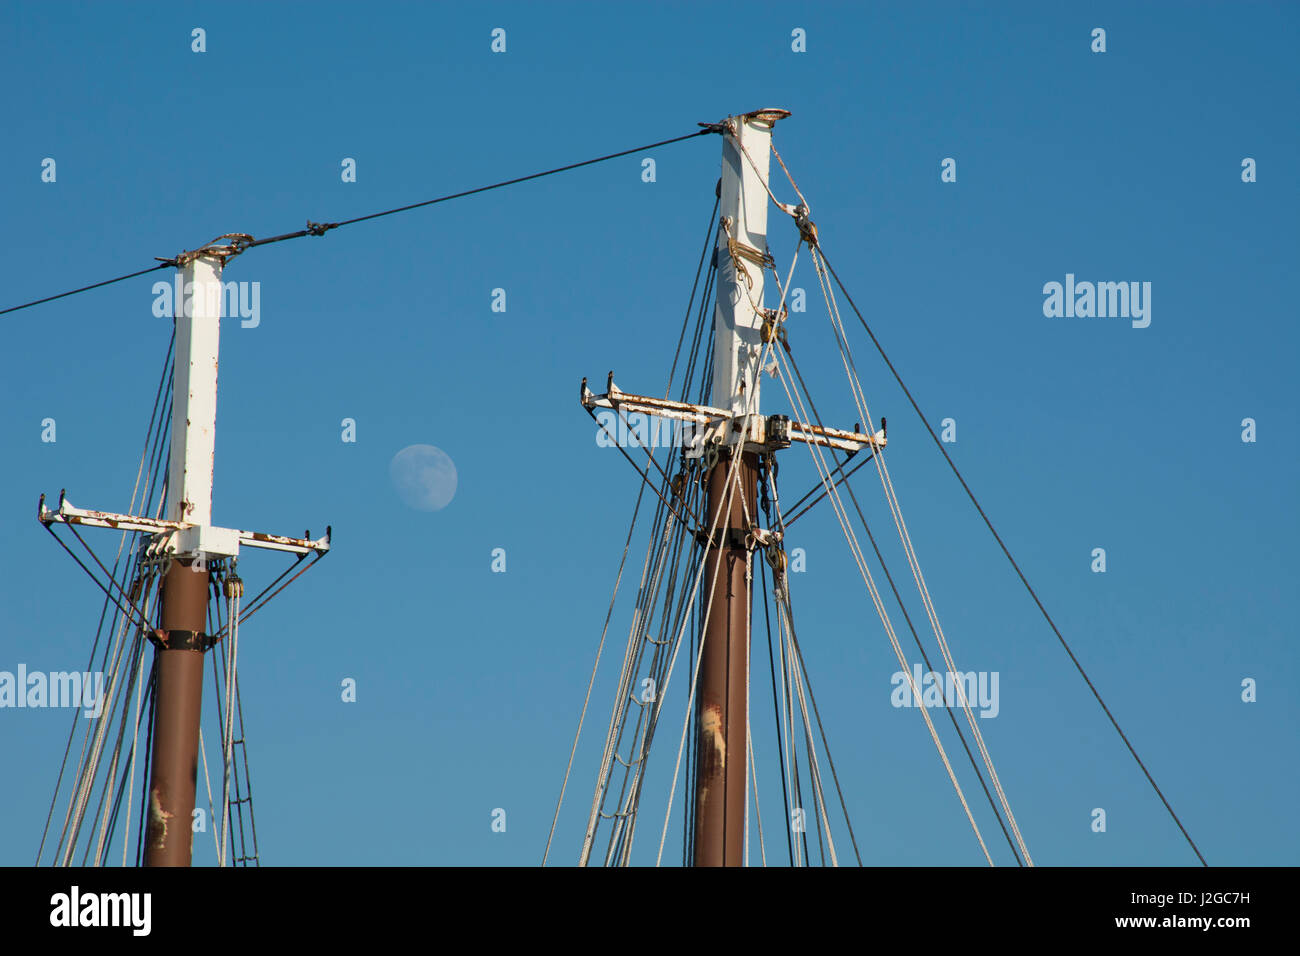 Maine, Bar Harbor. Tourist sightseeing boat the Margaret Todd, 151-foot four-masted schooner. Detail of masts with moon. Stock Photo